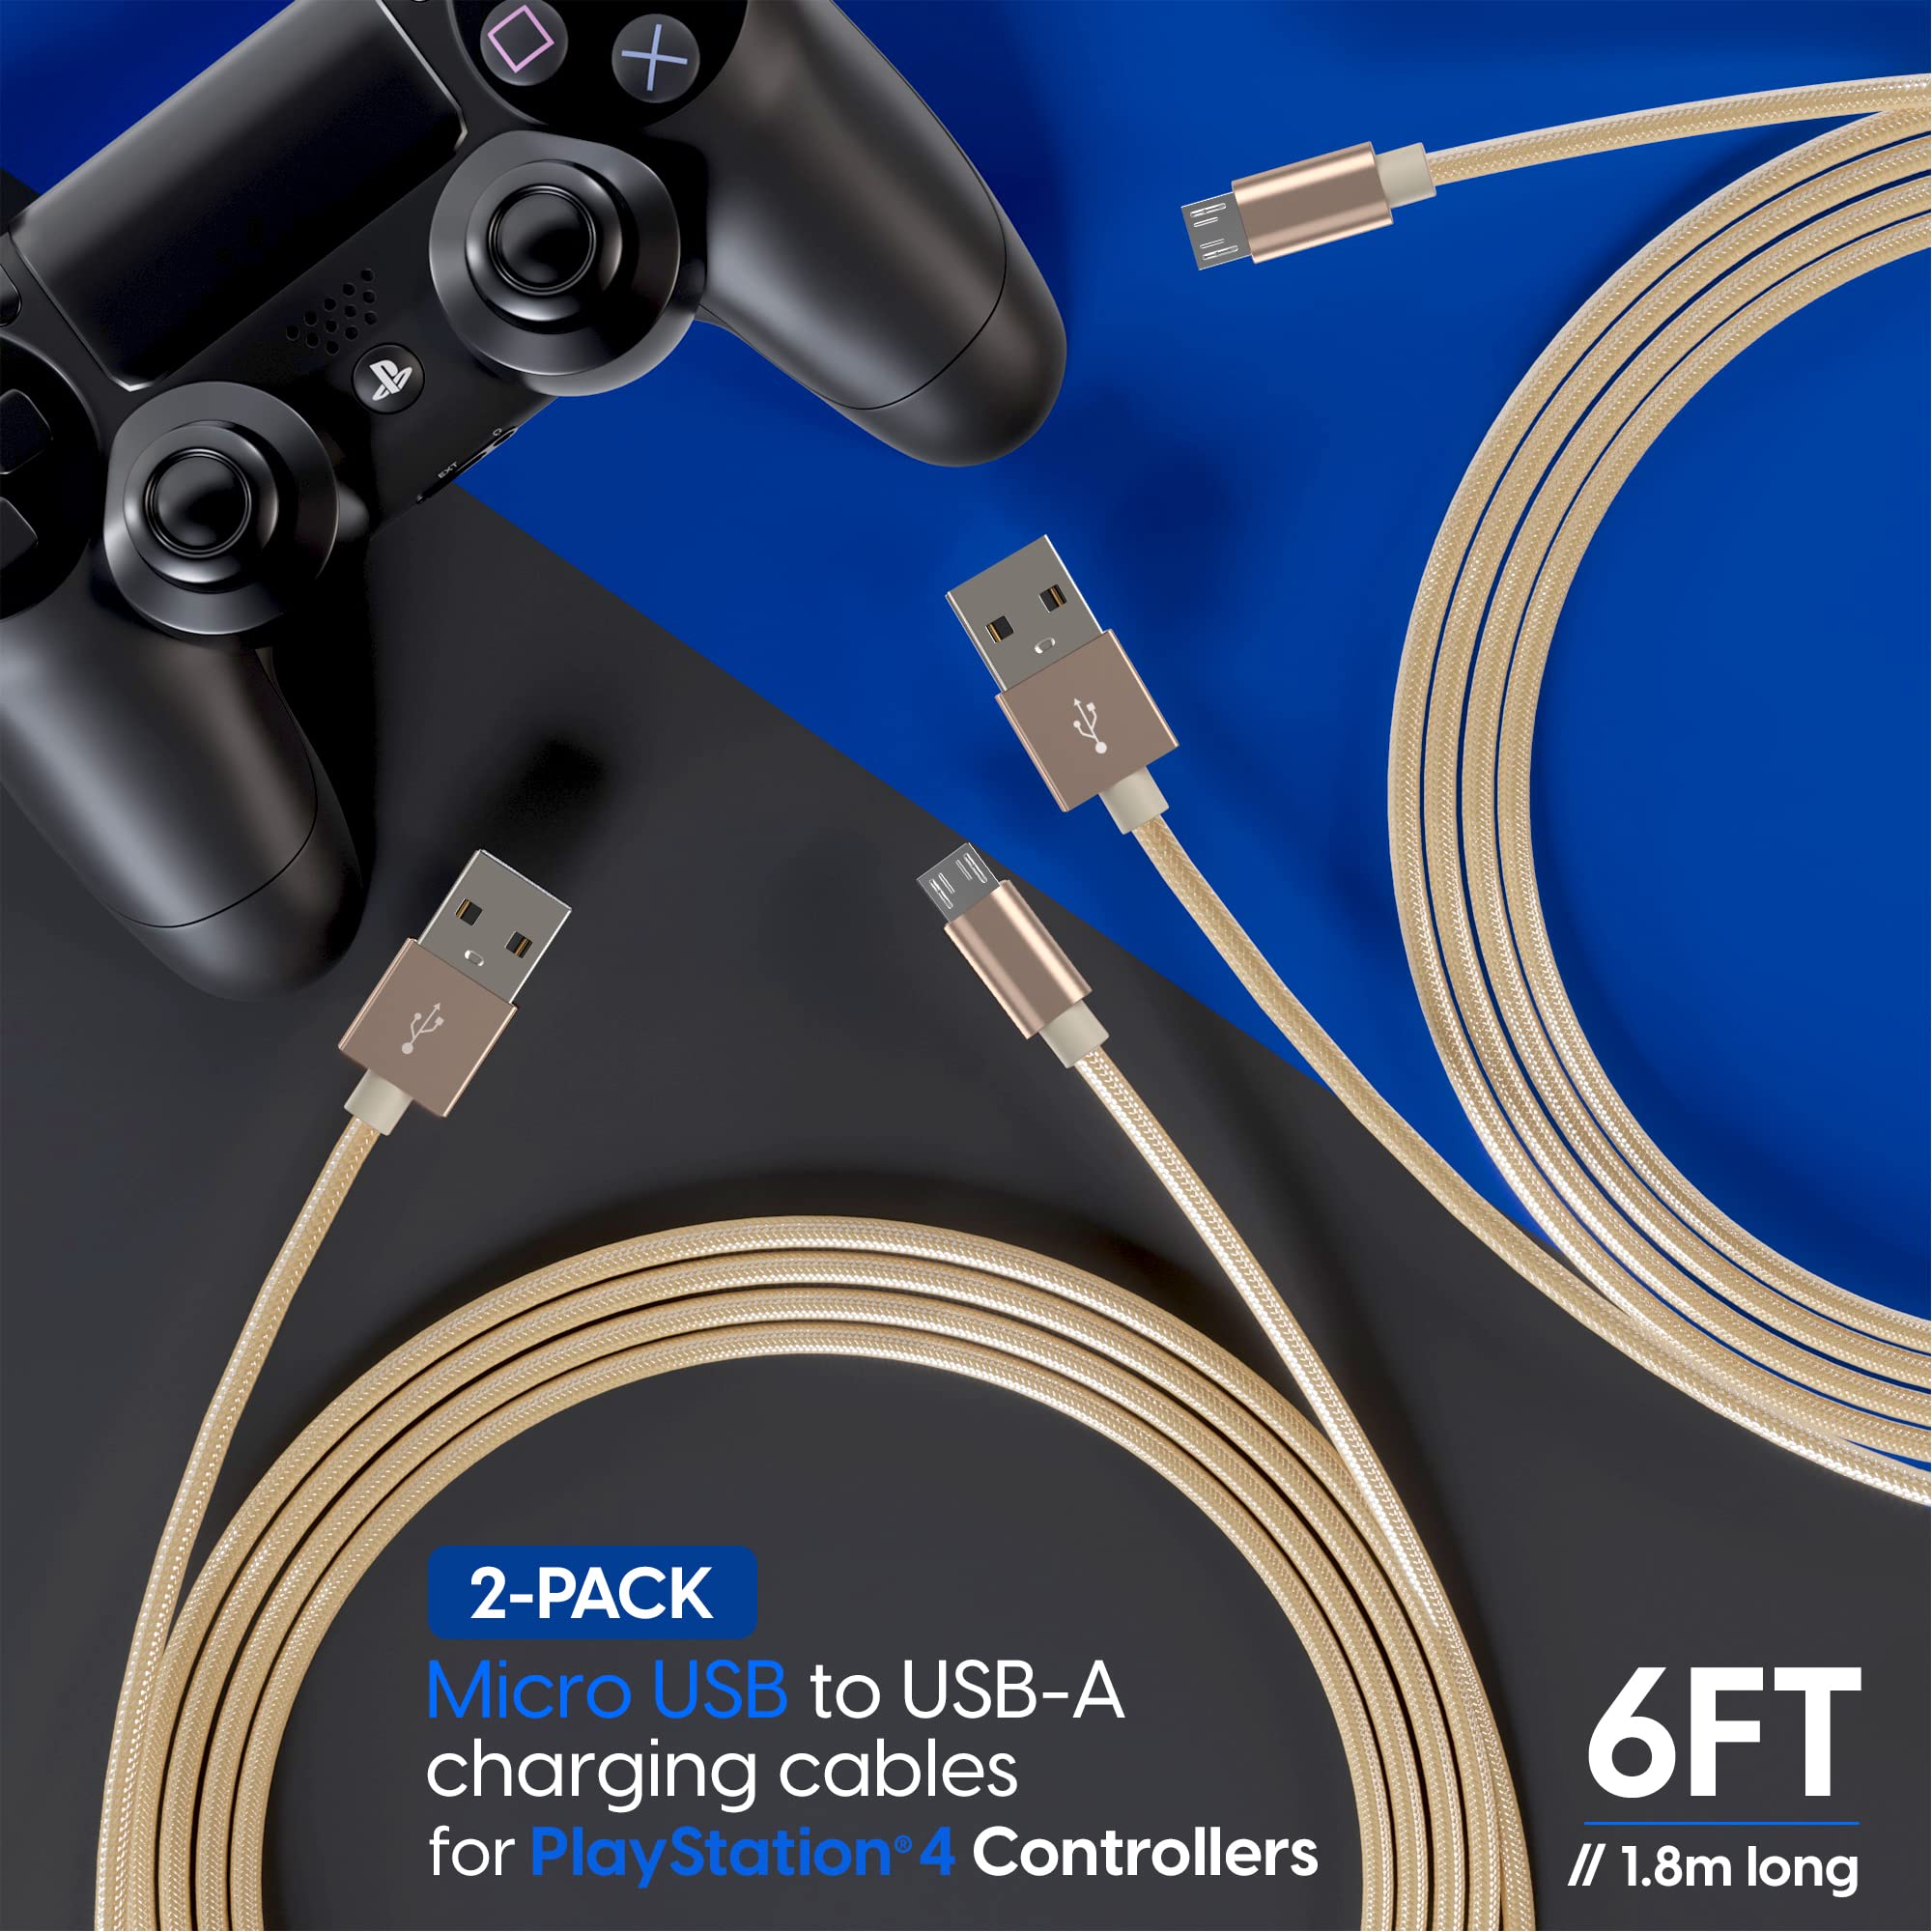 TALK WORKS Playstation 4 Charging Cable - 6' Nylon Braided Micro USB Charger Cord, Heavy Duty Fast Charge for PS4 (Gold, Pack of 2) (14092)